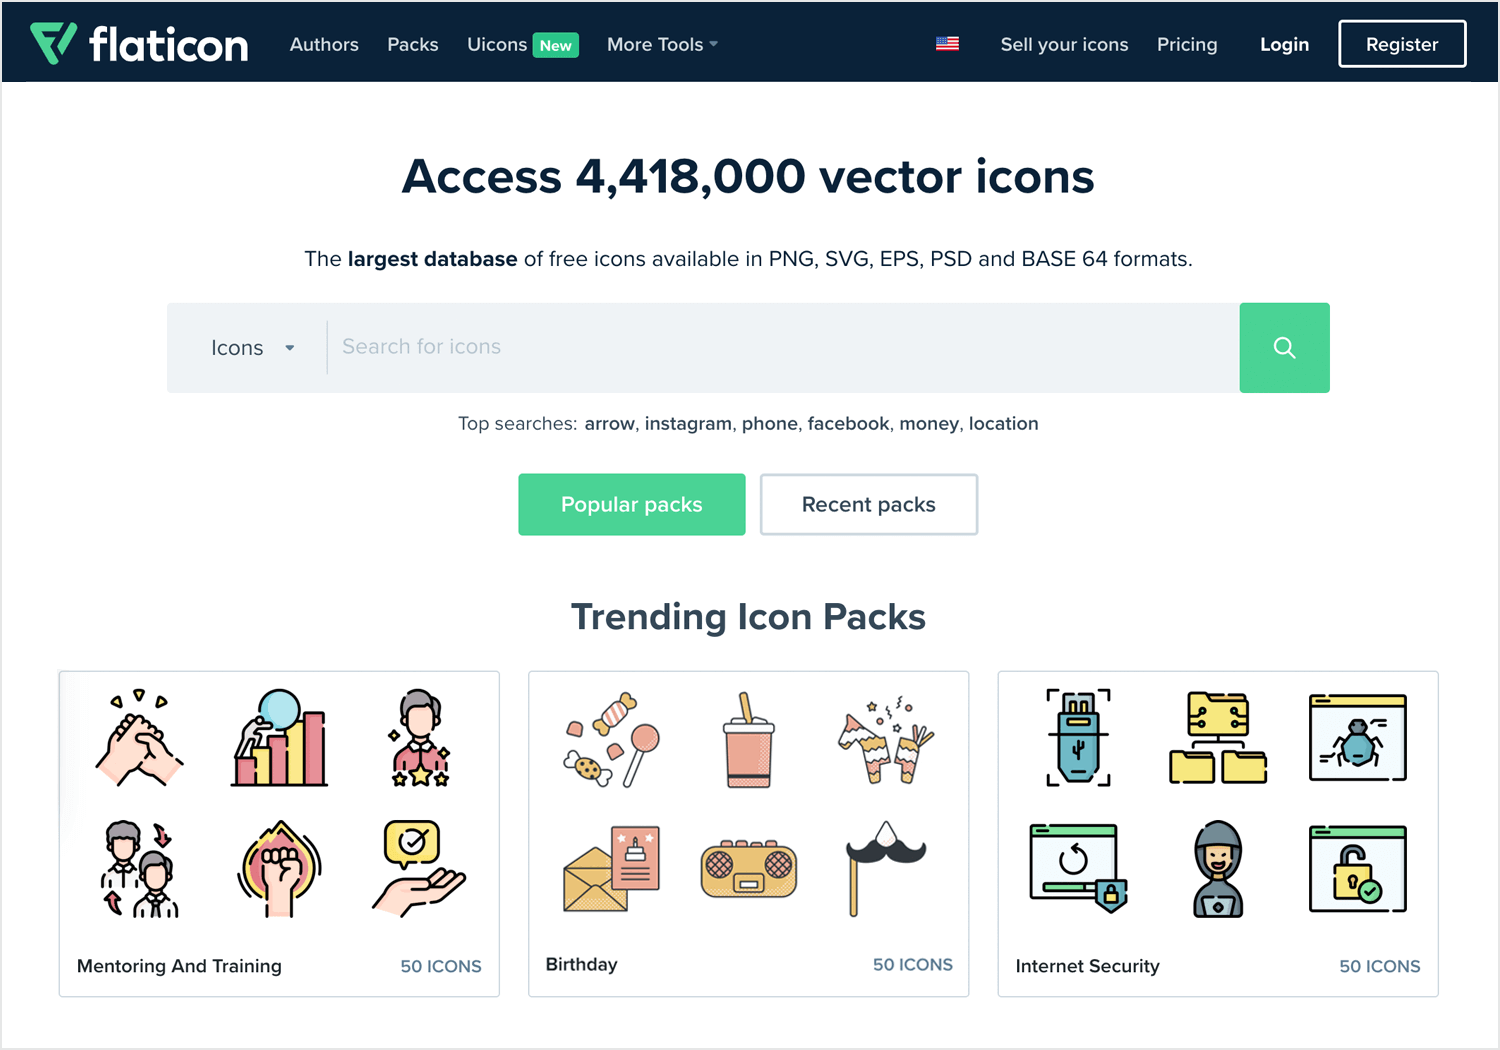 Free vector images - Flaticon homepage